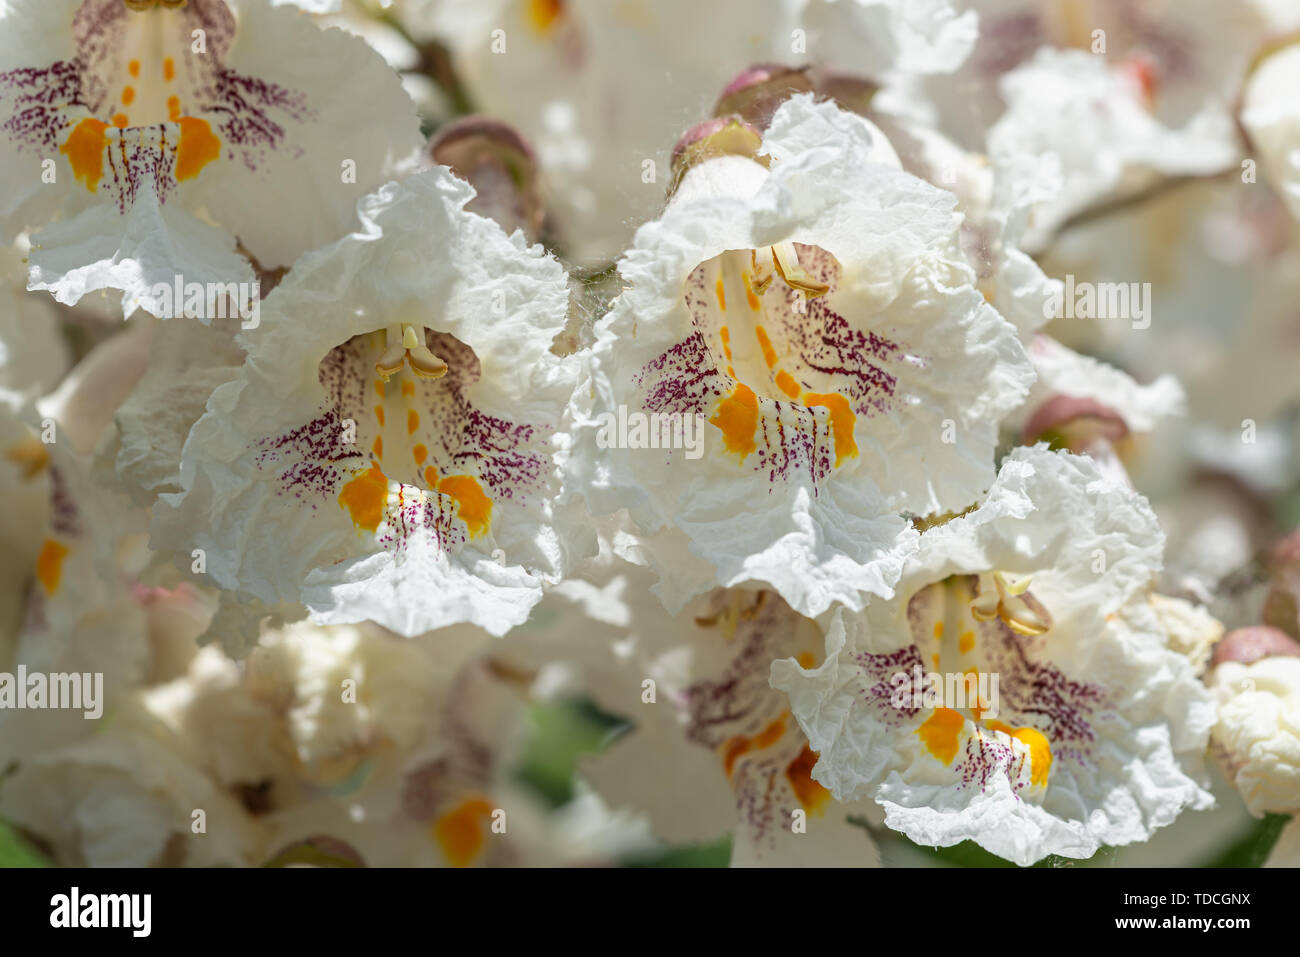 Catalpa bignonioides flowers, also known as southern catalpa, cigartree, and Indian-bean-tree. Stock Photo